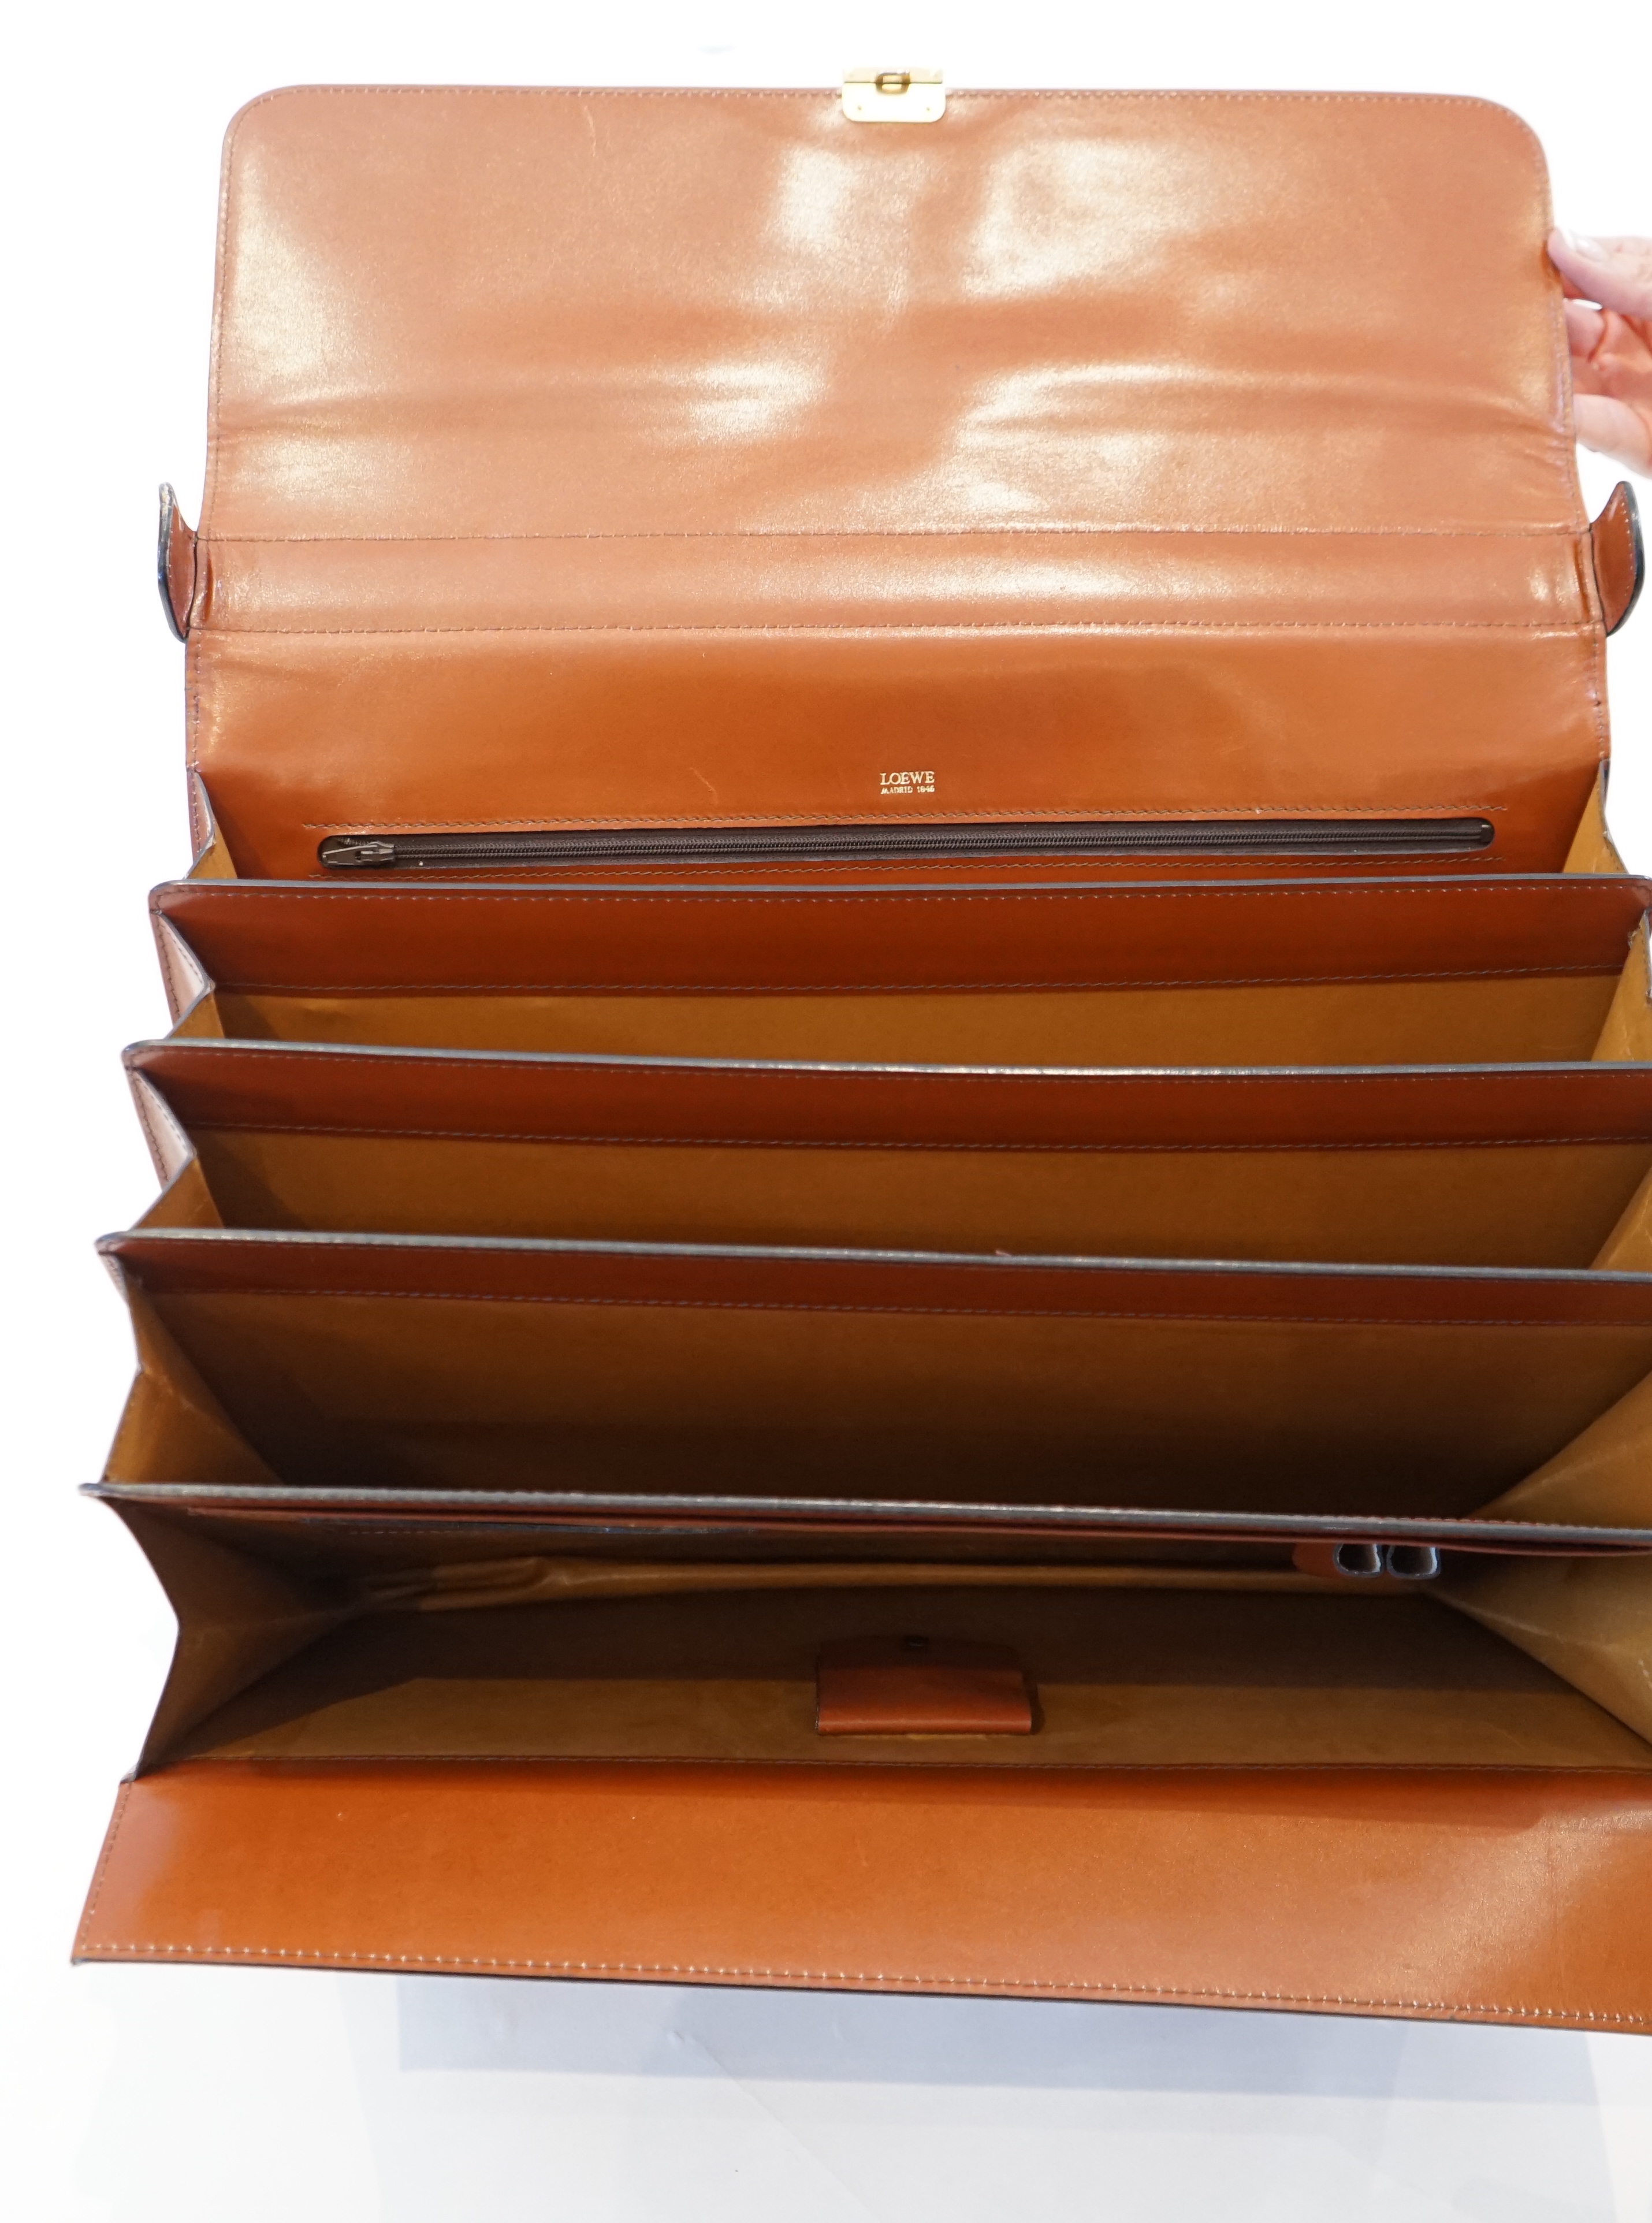 A gentlemen's Loewe brown tan leather briefcase with gold plated metalware, five division interior - Image 5 of 12